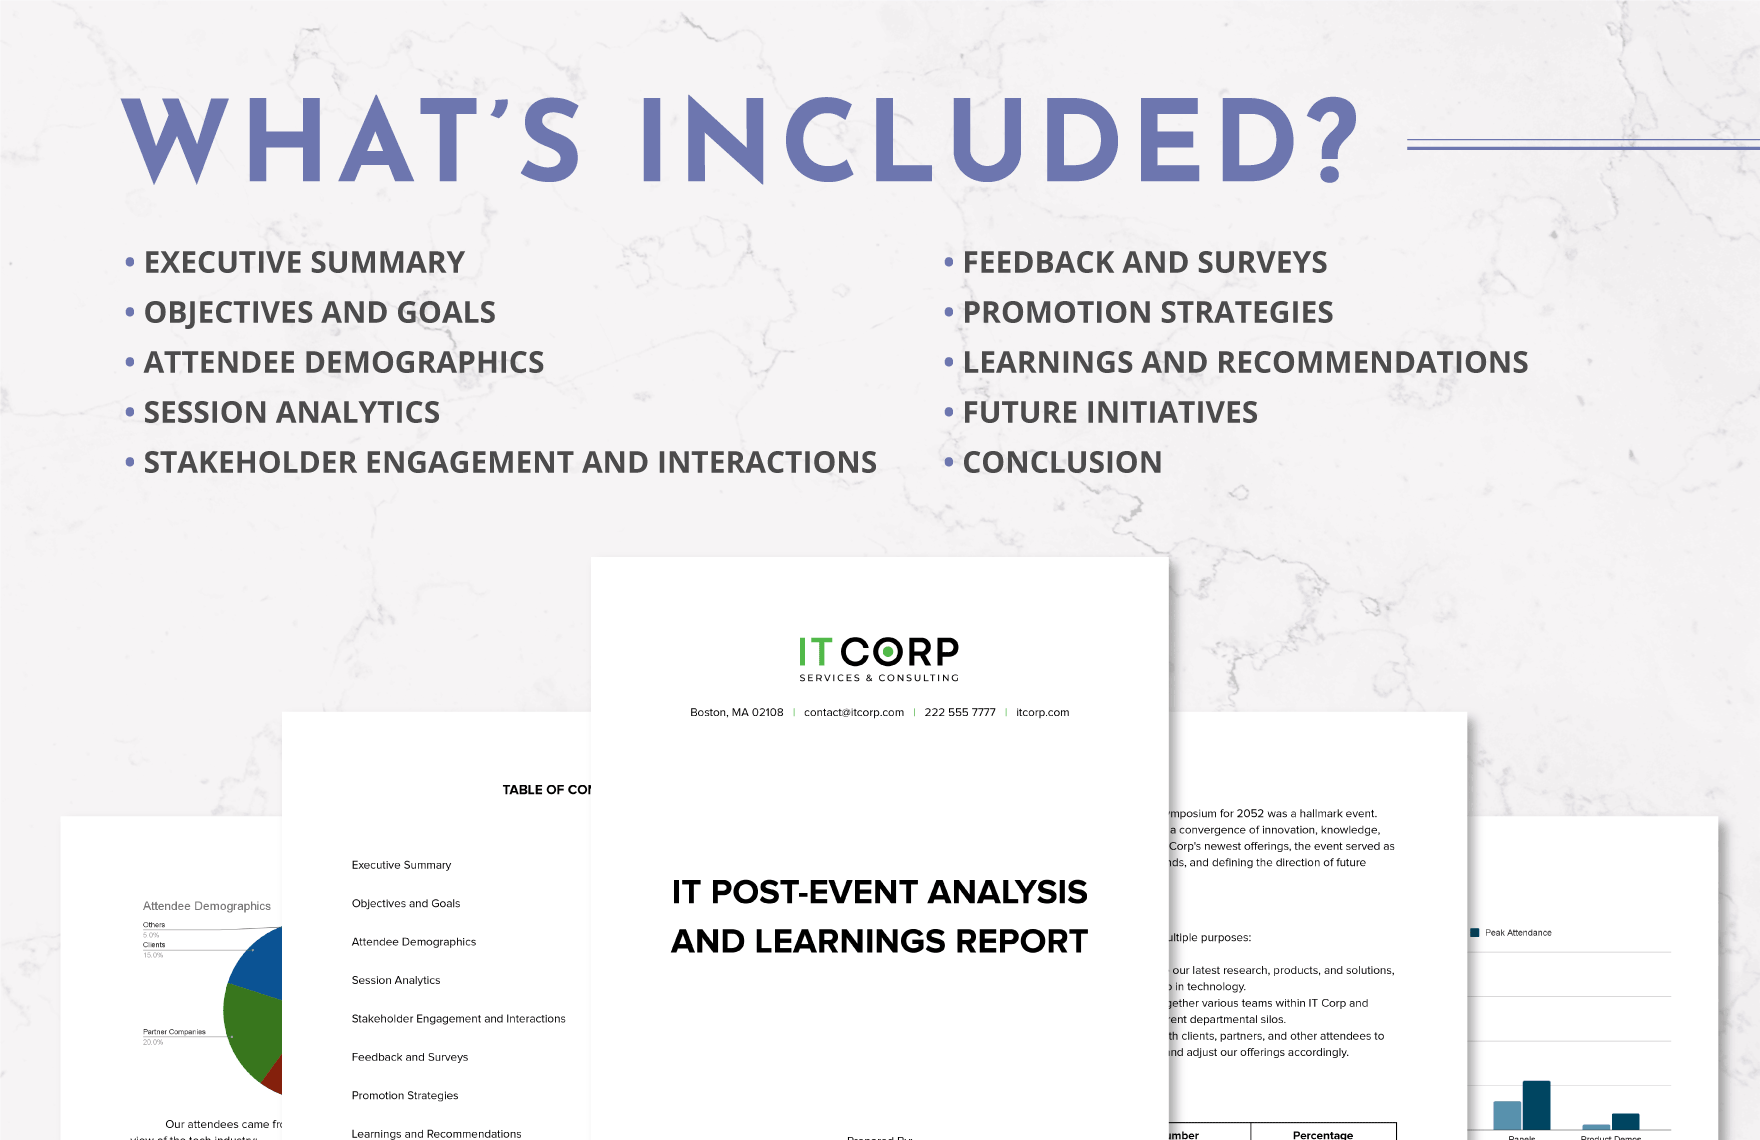 IT PostEvent Analysis and Learnings Report Template